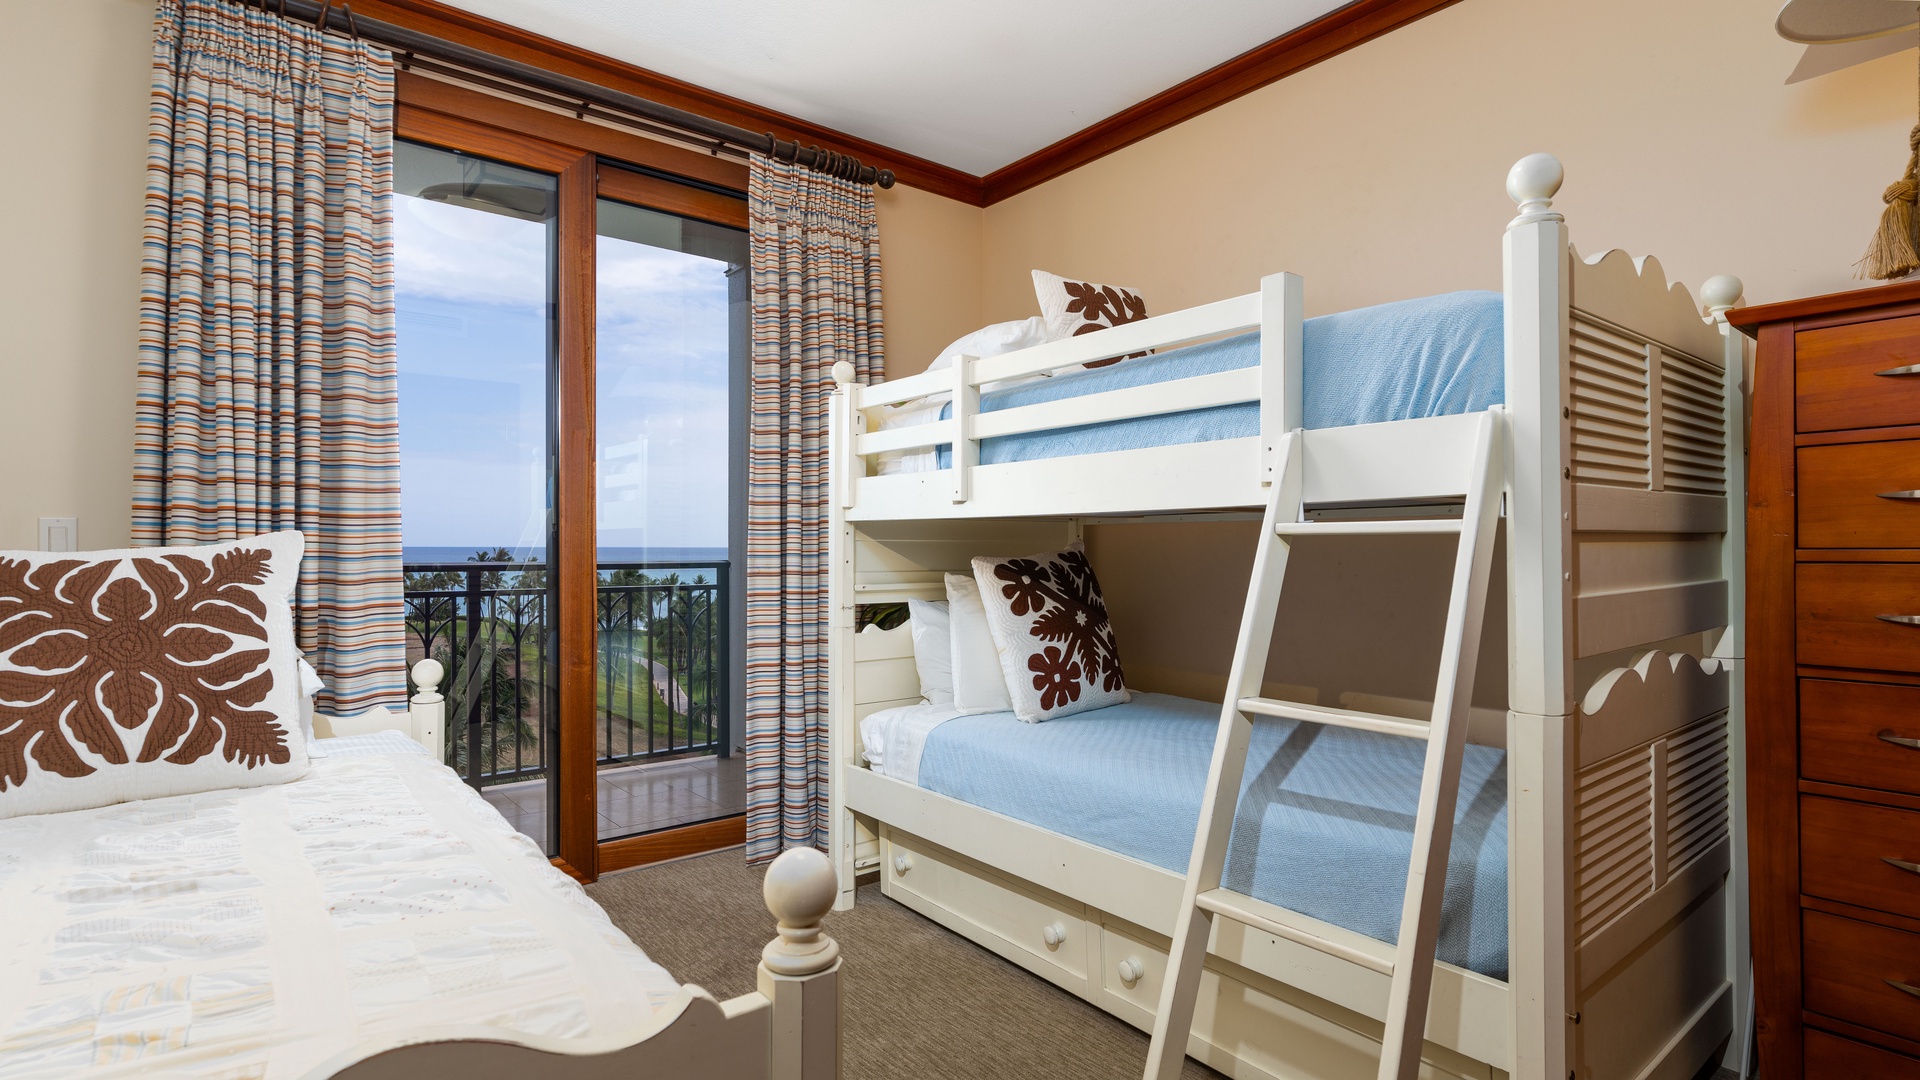 Kapolei Vacation Rentals, Ko Olina Beach Villas B701 - The third guest bedroom has twin single bed/twin bunk beds and private lanai access with ocean views.